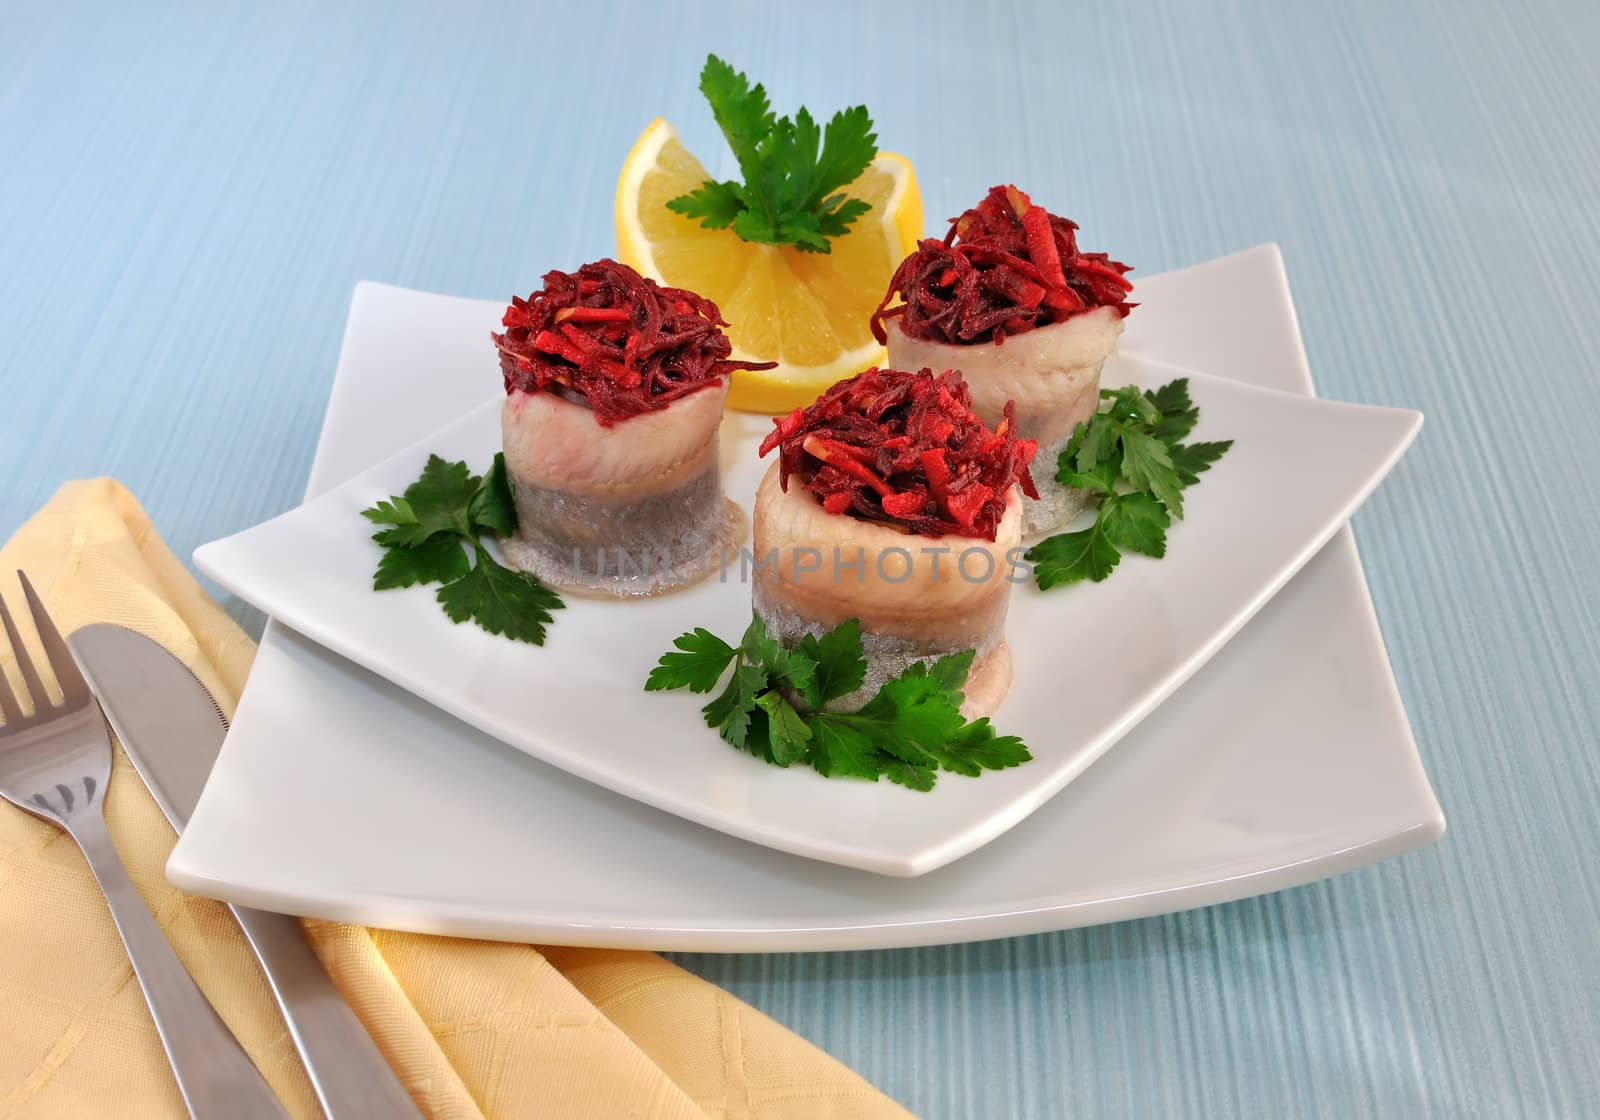 Rolls of herring with beetroot, apple stuffing by Apolonia